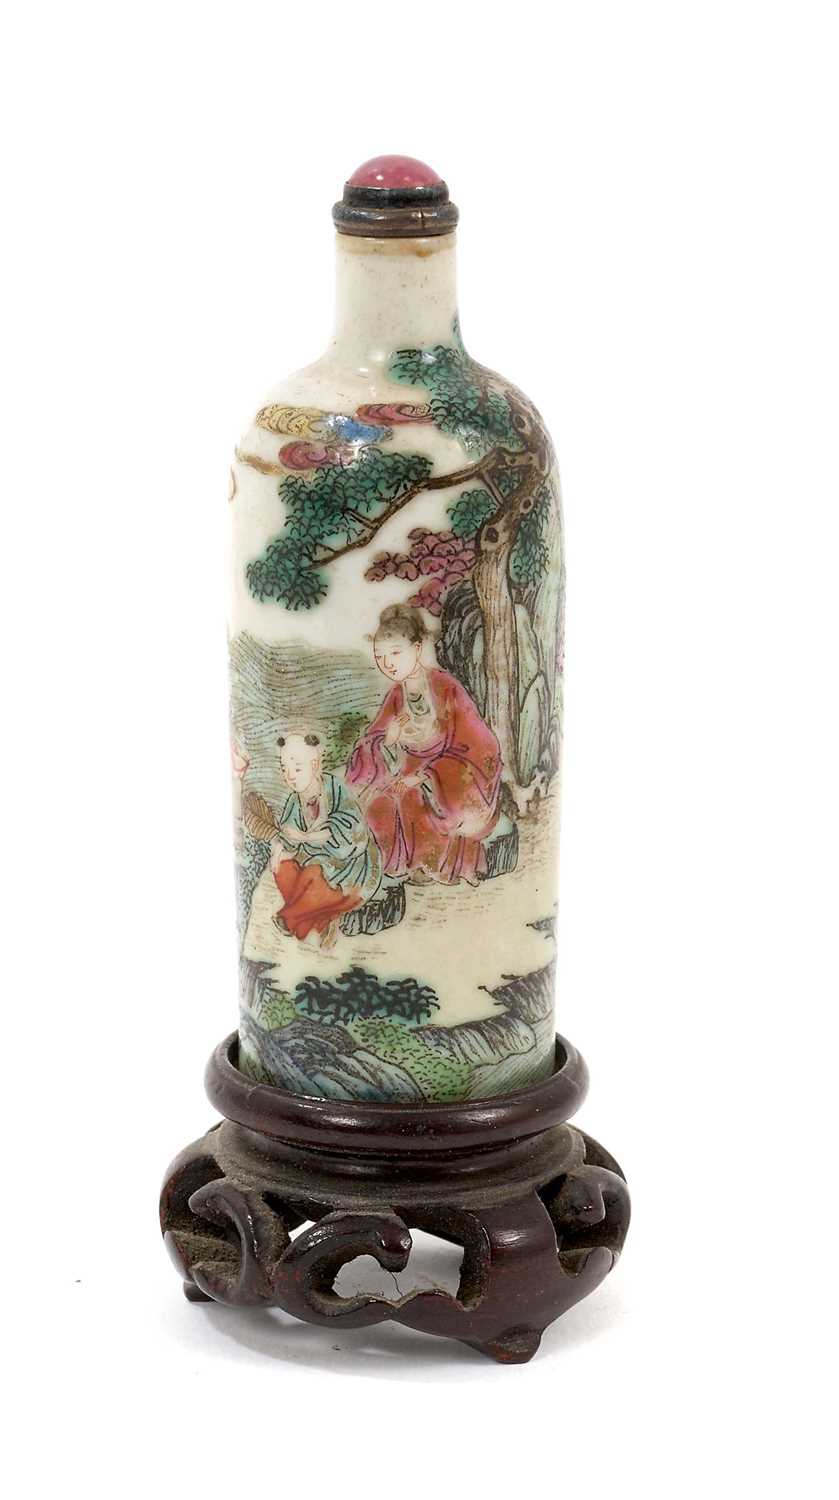 Lot 830 - Good quality 19th century Chinese enamelled porcelain snuff bottle, decorated with continuous frieze, 8cm high, seal mark to the base, raised on pierced wooden stand